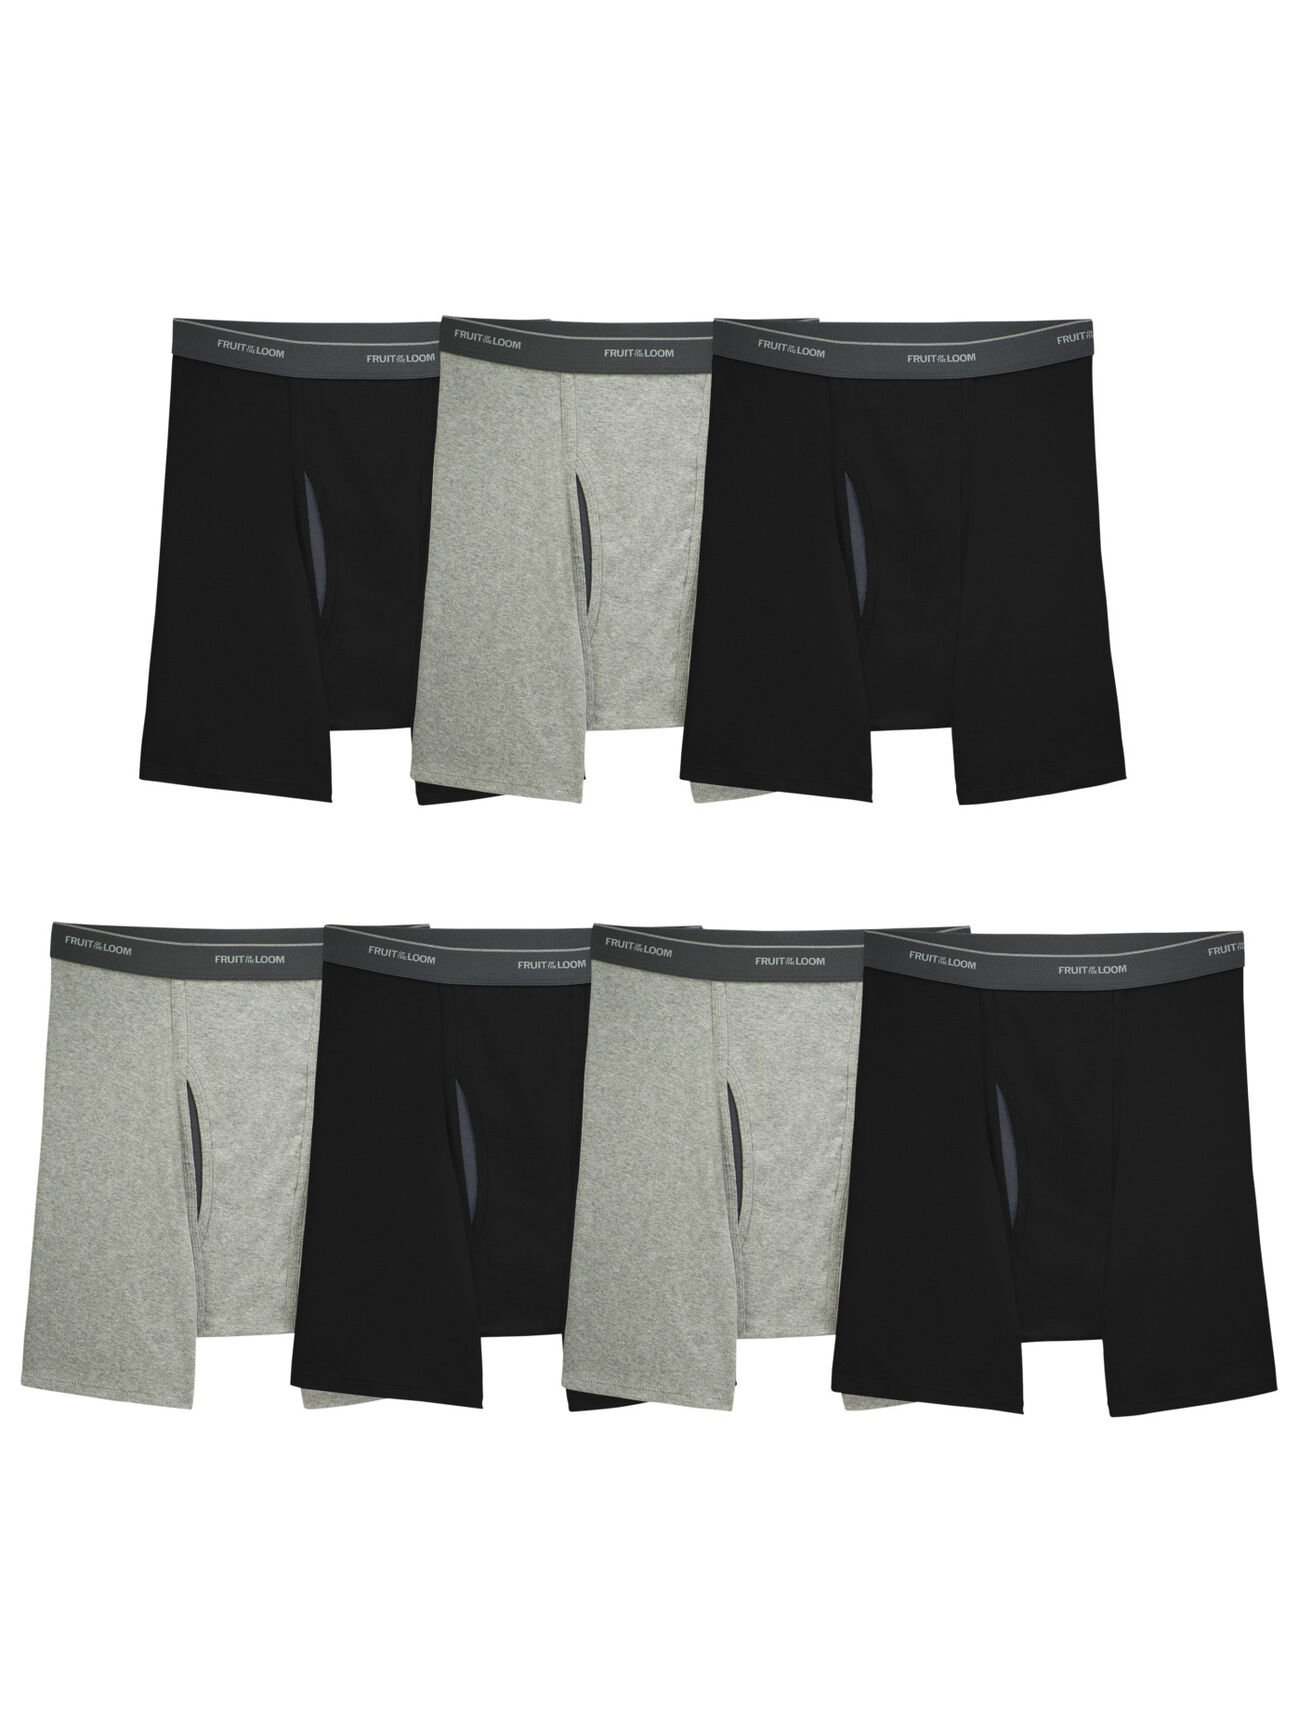 Fruit of the Loom - Tag-free CoolZone Fly boxer briefs, pk. of 3 - Plus  Size. Colour: black. Size: 2xl